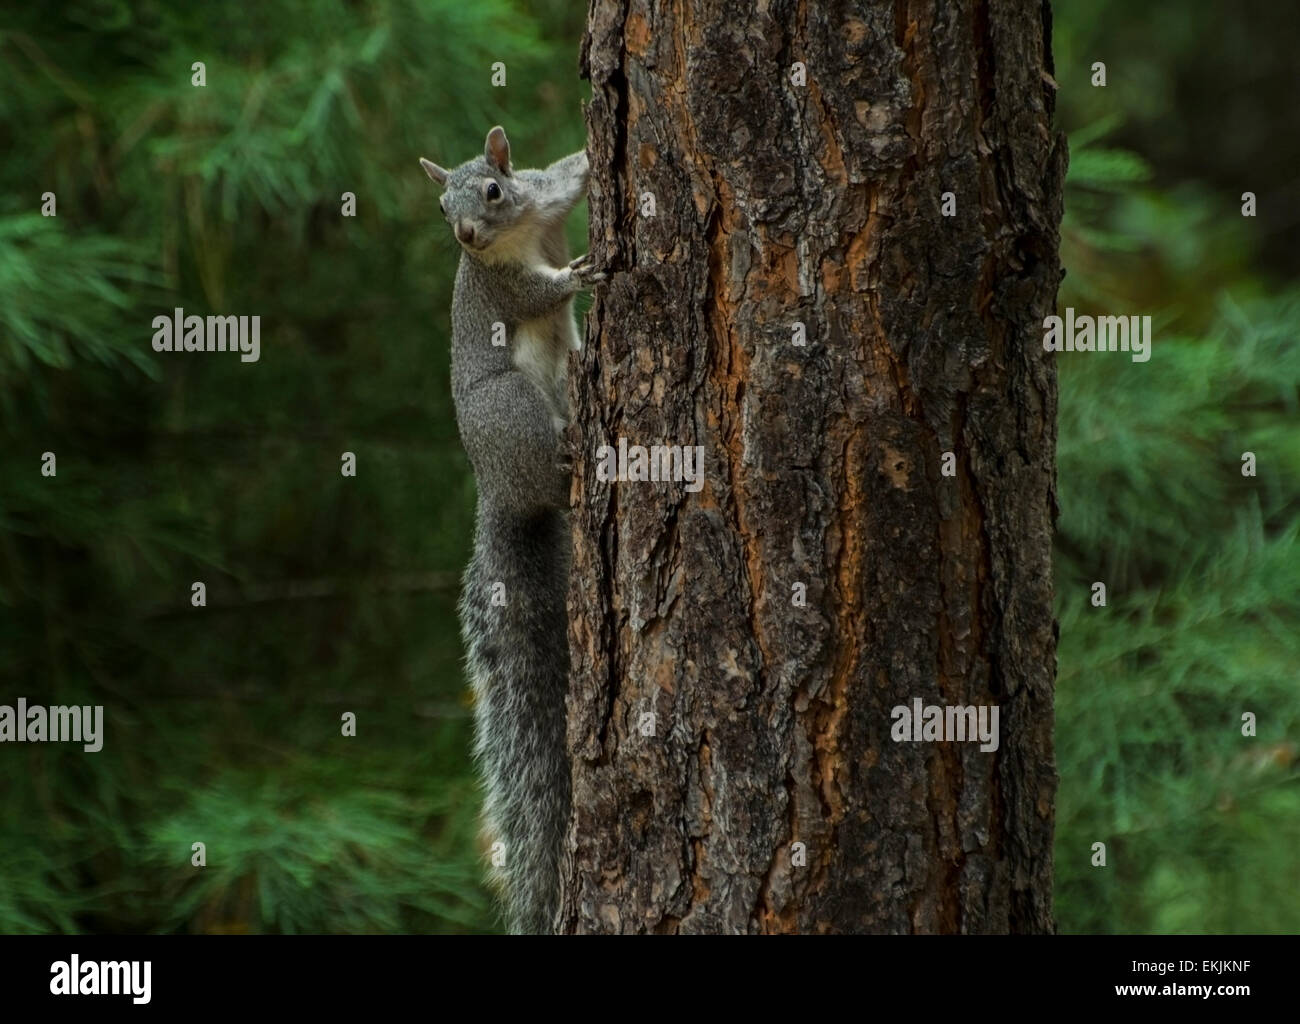 Western gray squirrel (Sciurus griseus) is an arboreal rodent who dwells in the forests of the Sierra foothills in California. Stock Photo